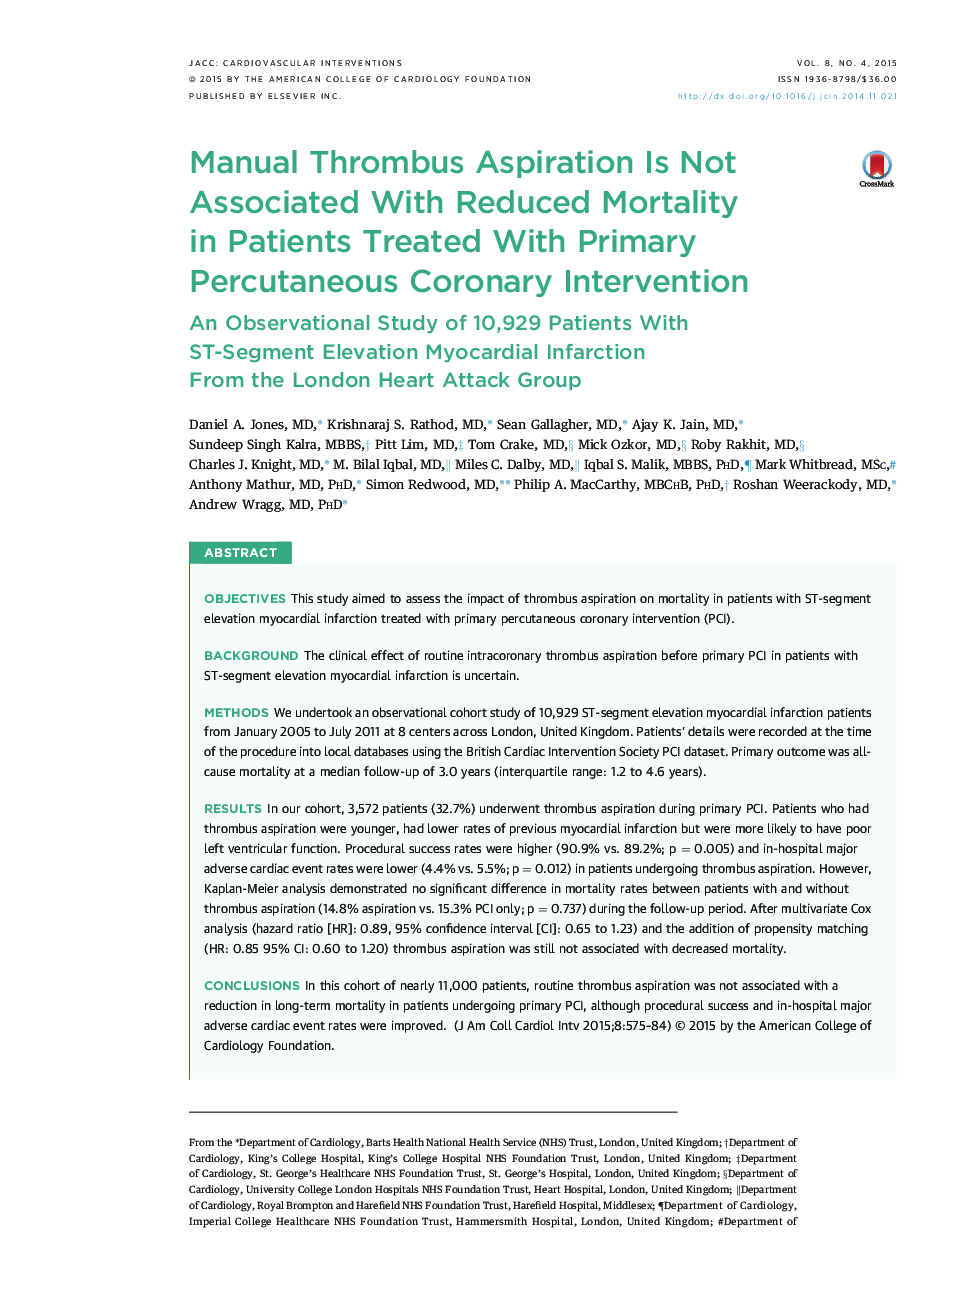 Manual Thrombus Aspiration Is Not Associated With Reduced Mortality in Patients Treated With Primary Percutaneous Coronary Intervention : An Observational Study of 10,929 Patients With ST-Segment Elevation Myocardial Infarction From the London Heart Attac